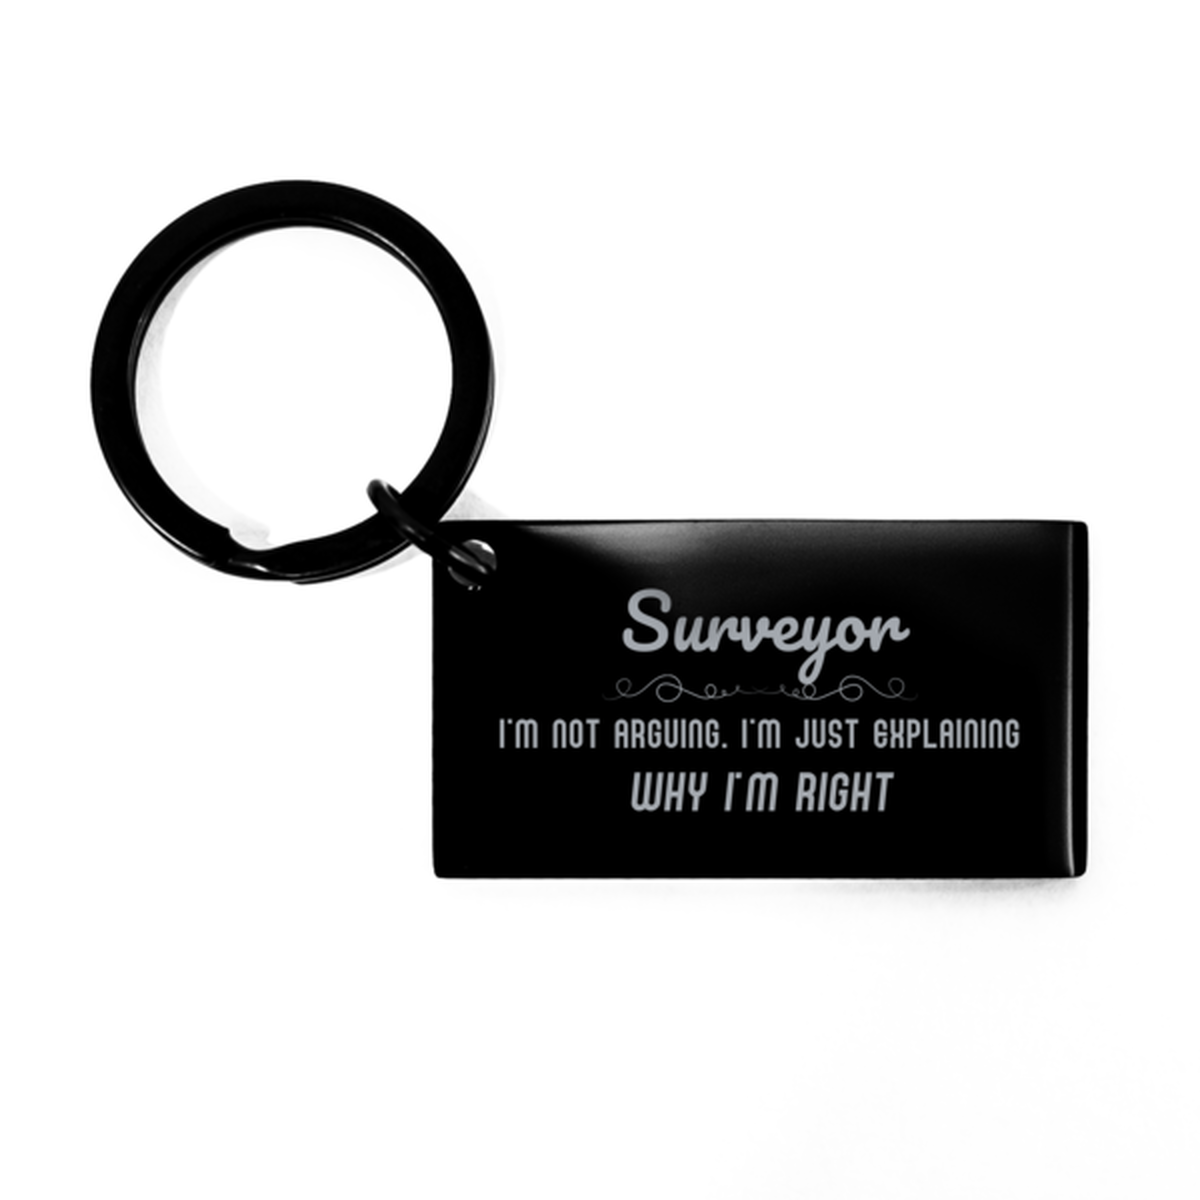 Surveyor I'm not Arguing. I'm Just Explaining Why I'm RIGHT Keychain, Funny Saying Quote Surveyor Gifts For Surveyor Graduation Birthday Christmas Gifts for Men Women Coworker